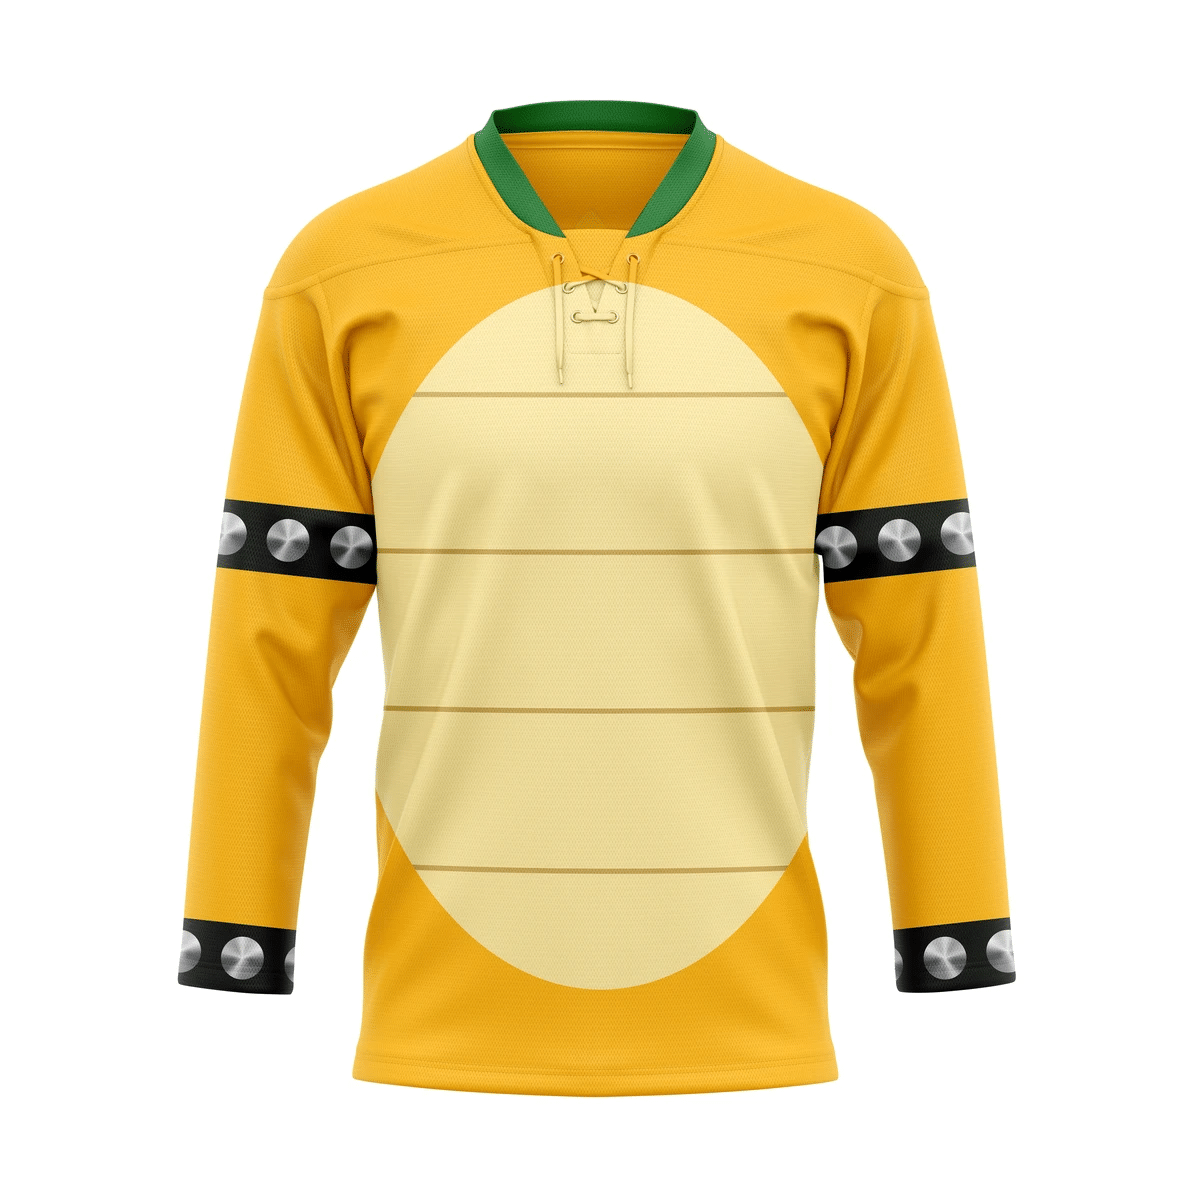 The hockey jersey is one of the most important items to have as a sports fan. 25